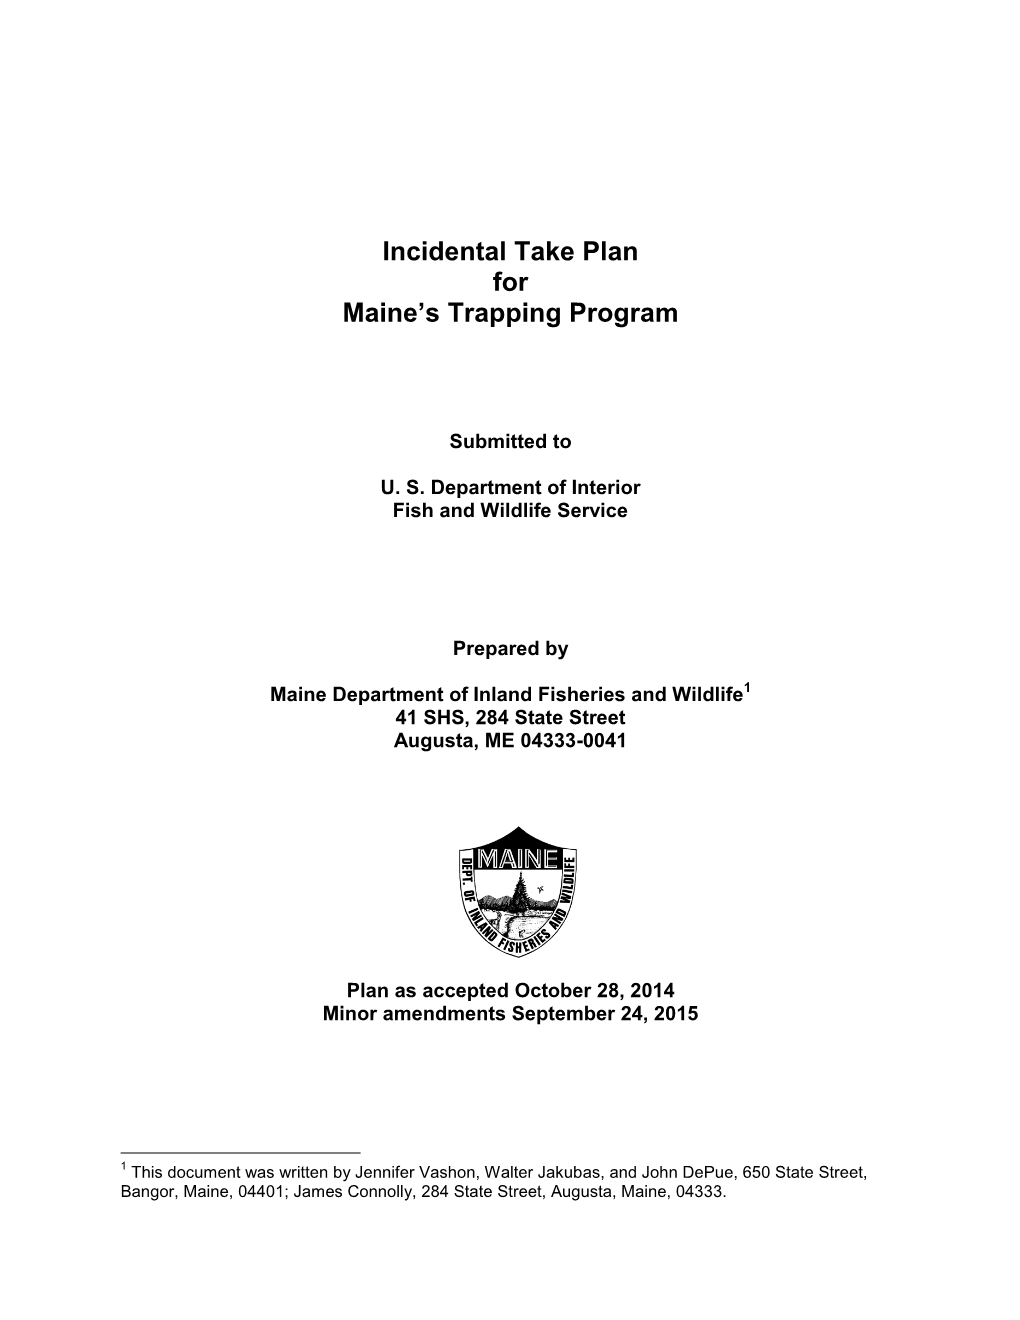 Incidental Take Plan for Maine's Trapping Program